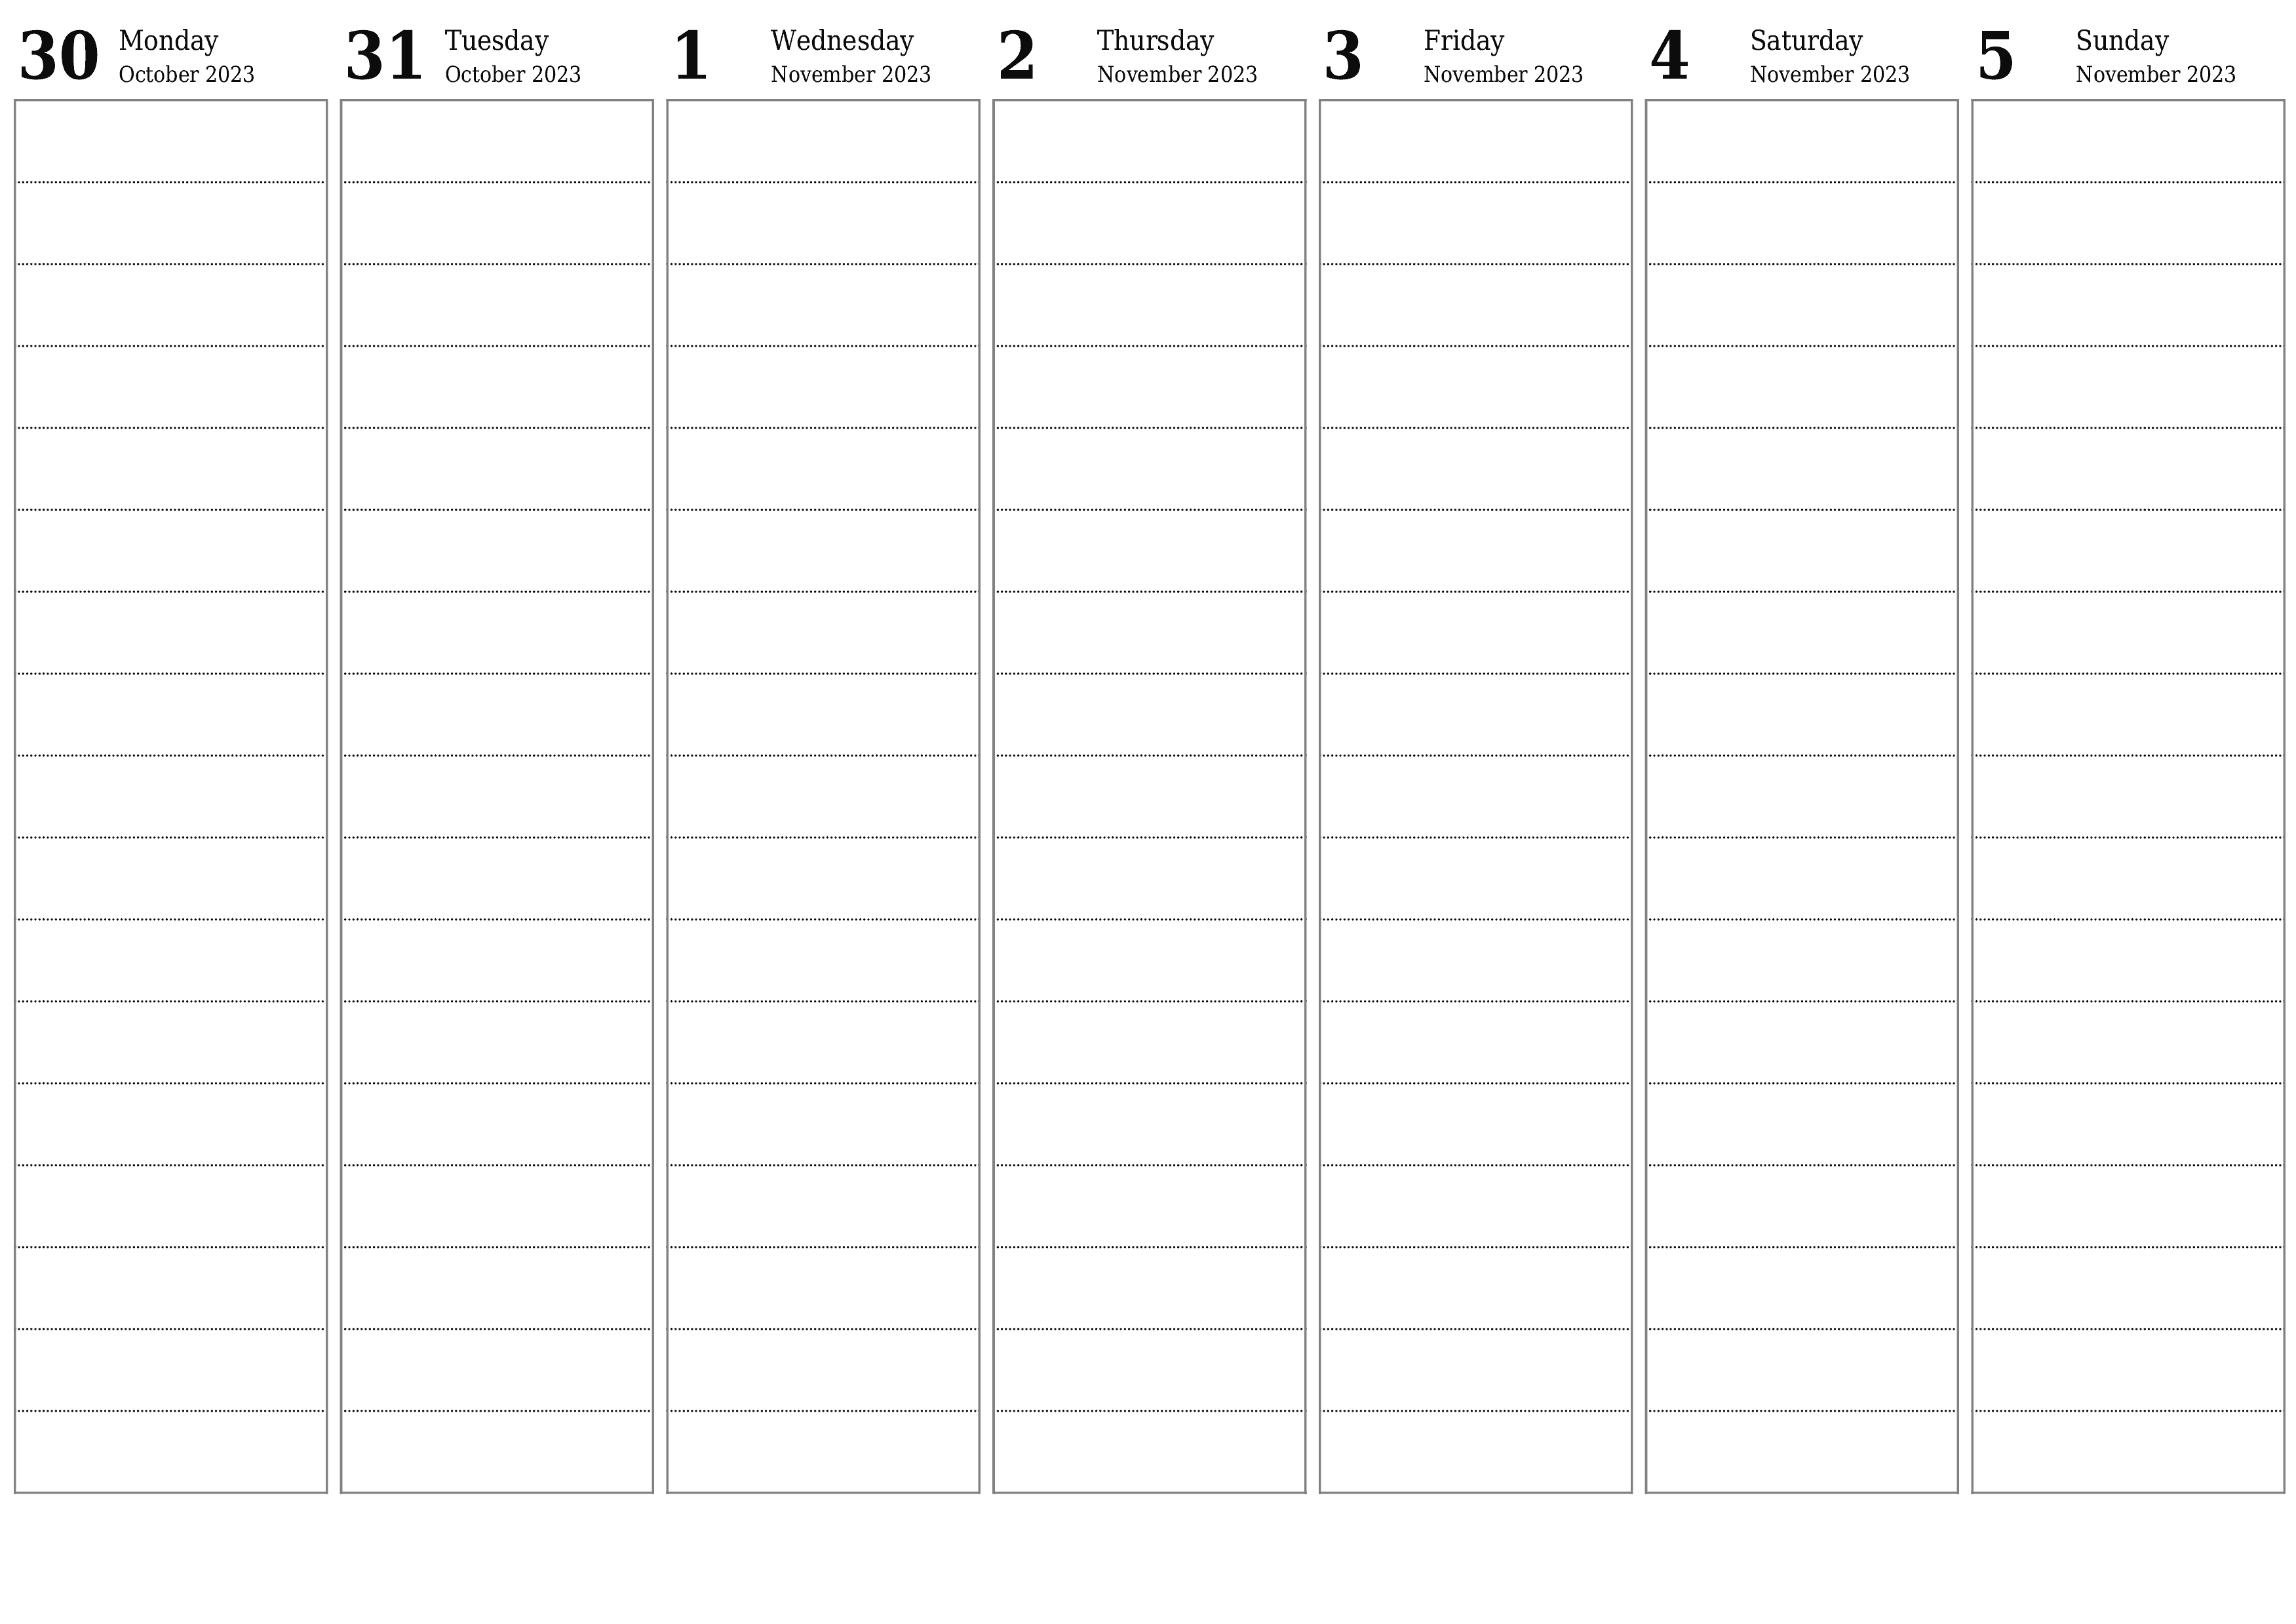 Blank weekly printable calendar and planner for week November 2023 with notes, save and print to PDF PNG English - 7calendar.com